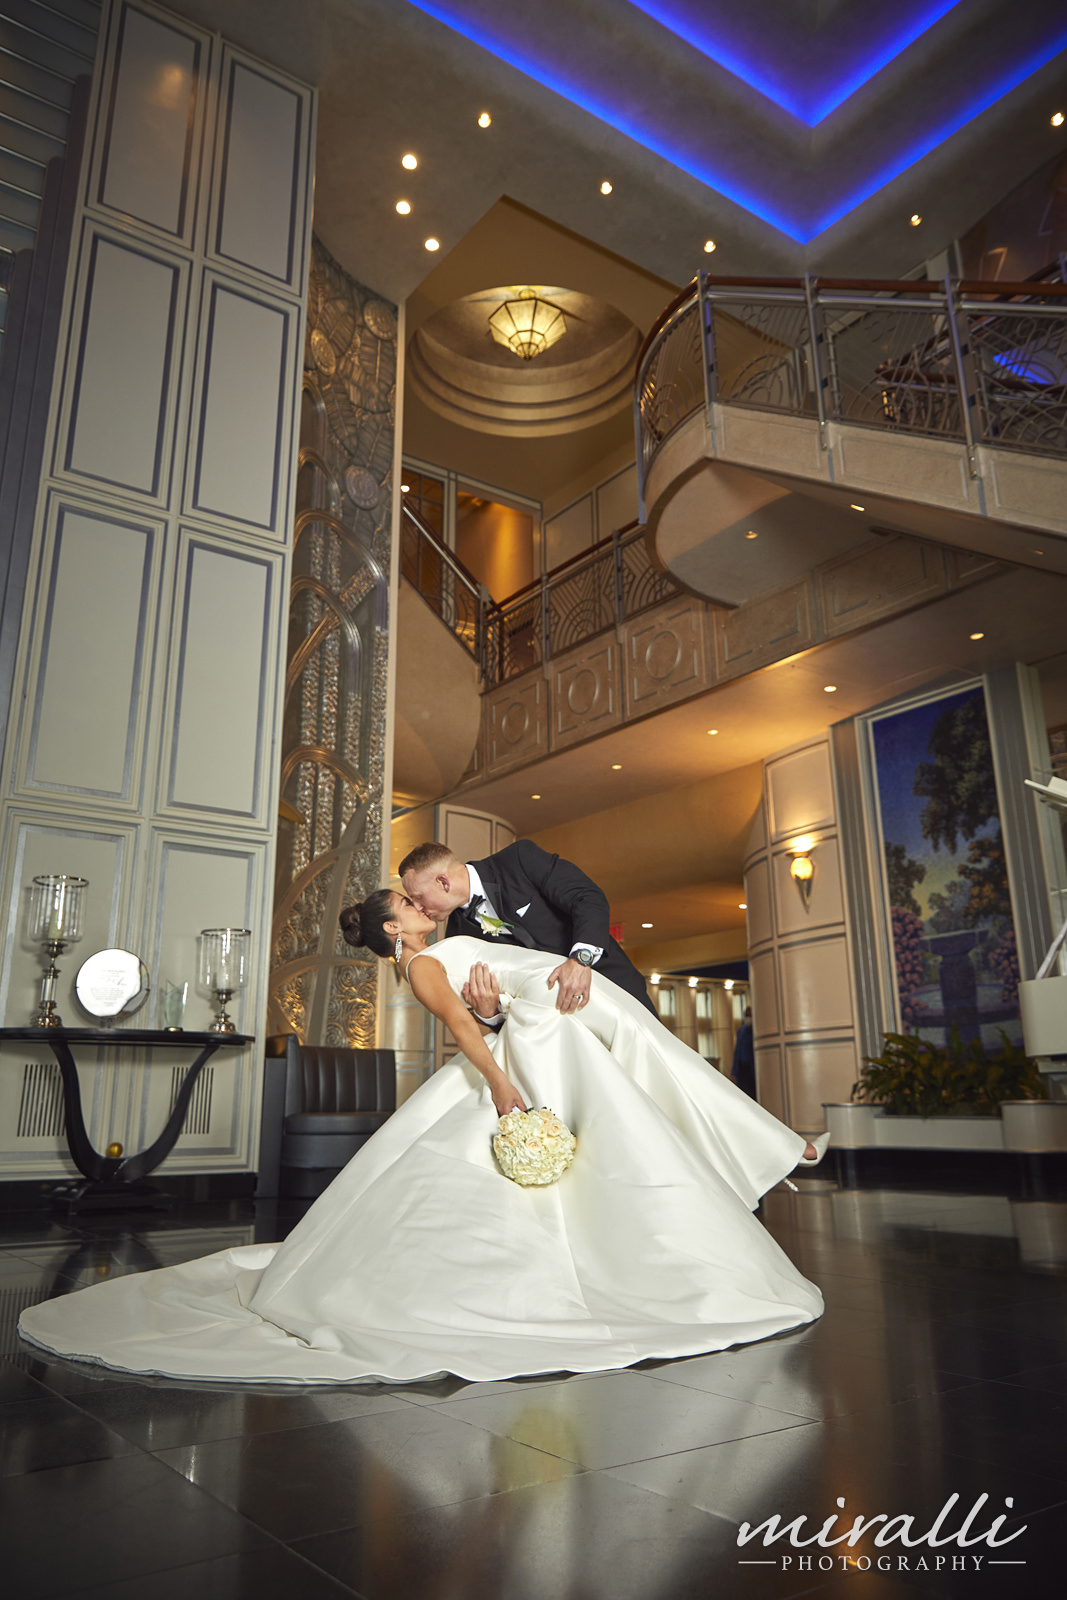 Chateau Briand Wedding Photos by Miralli Photography